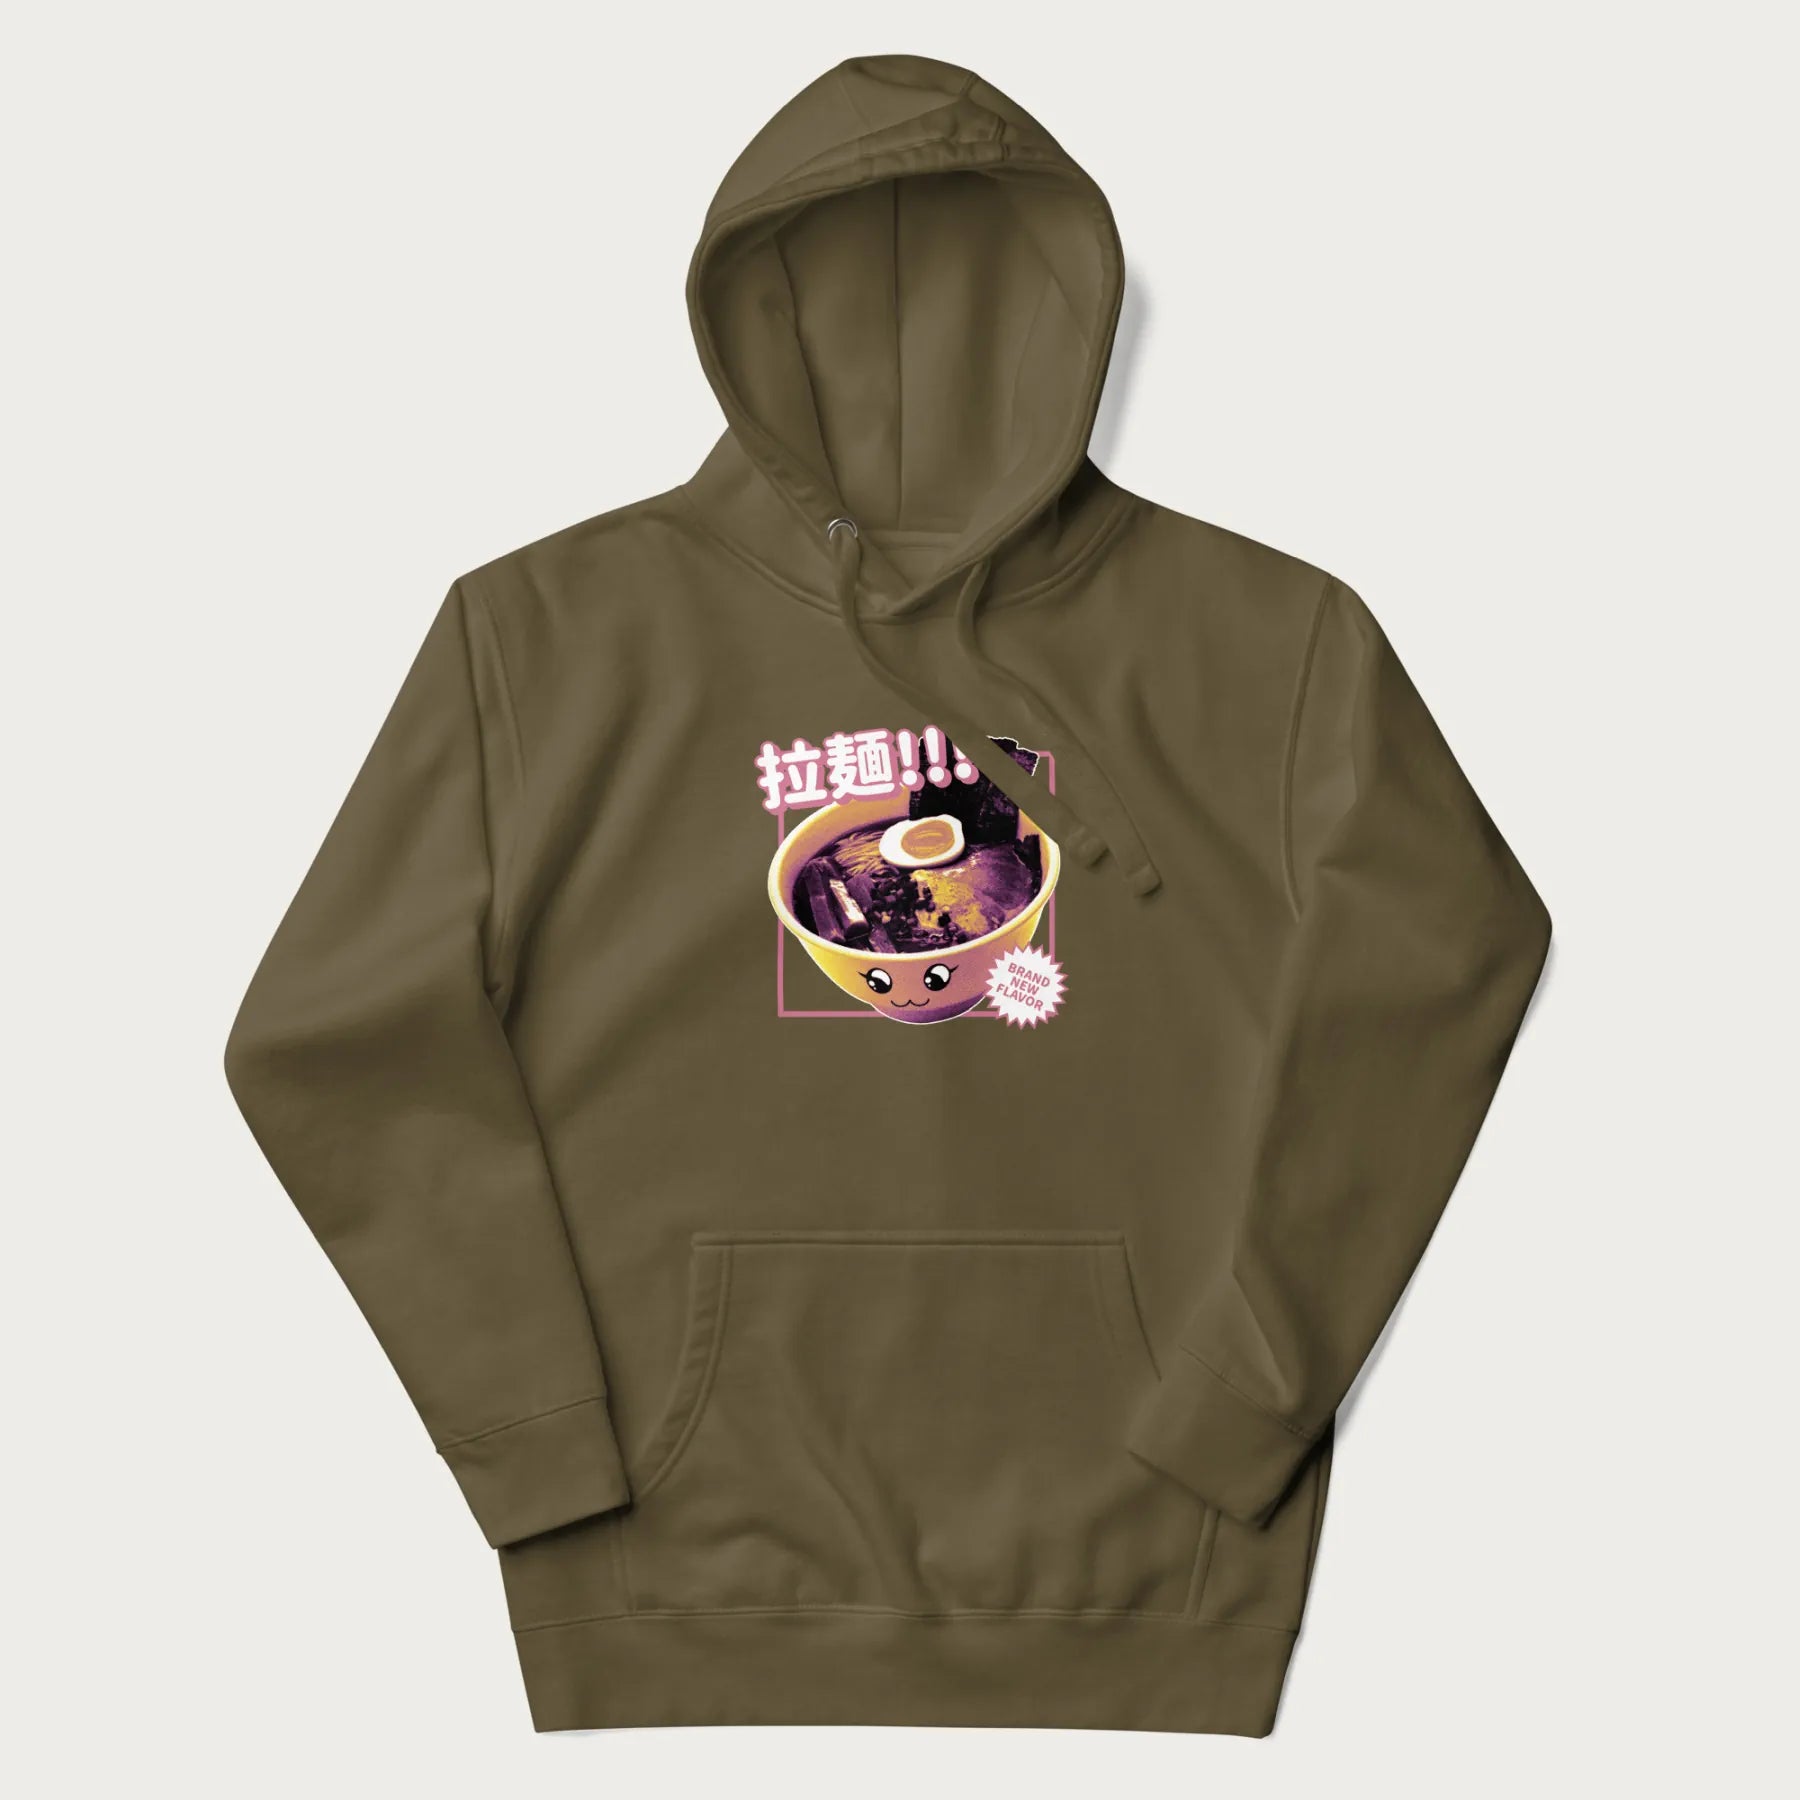 Military green hoodie with Japanese text '拉麵!!!' (Ramen!!!) in vibrant pink and realistic ramen bowl graphic.